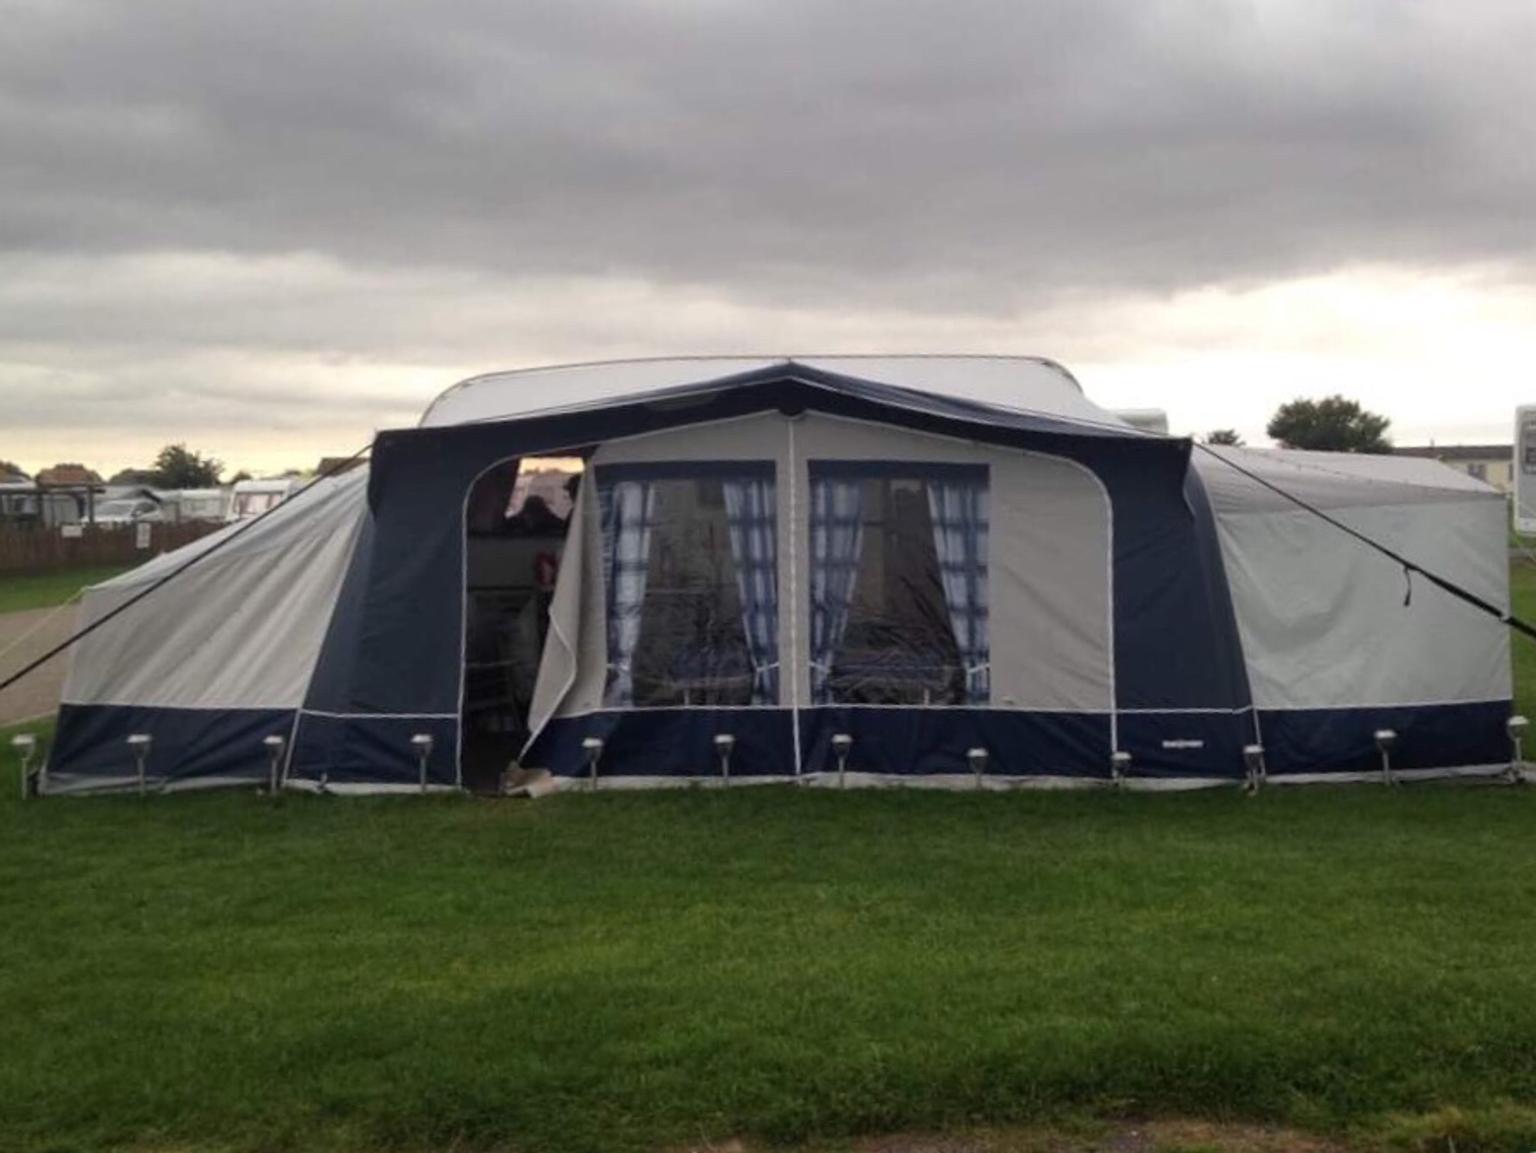 850 875 Size 9 Eurovent Awning In Doncaster For 225 00 For Sale Shpock